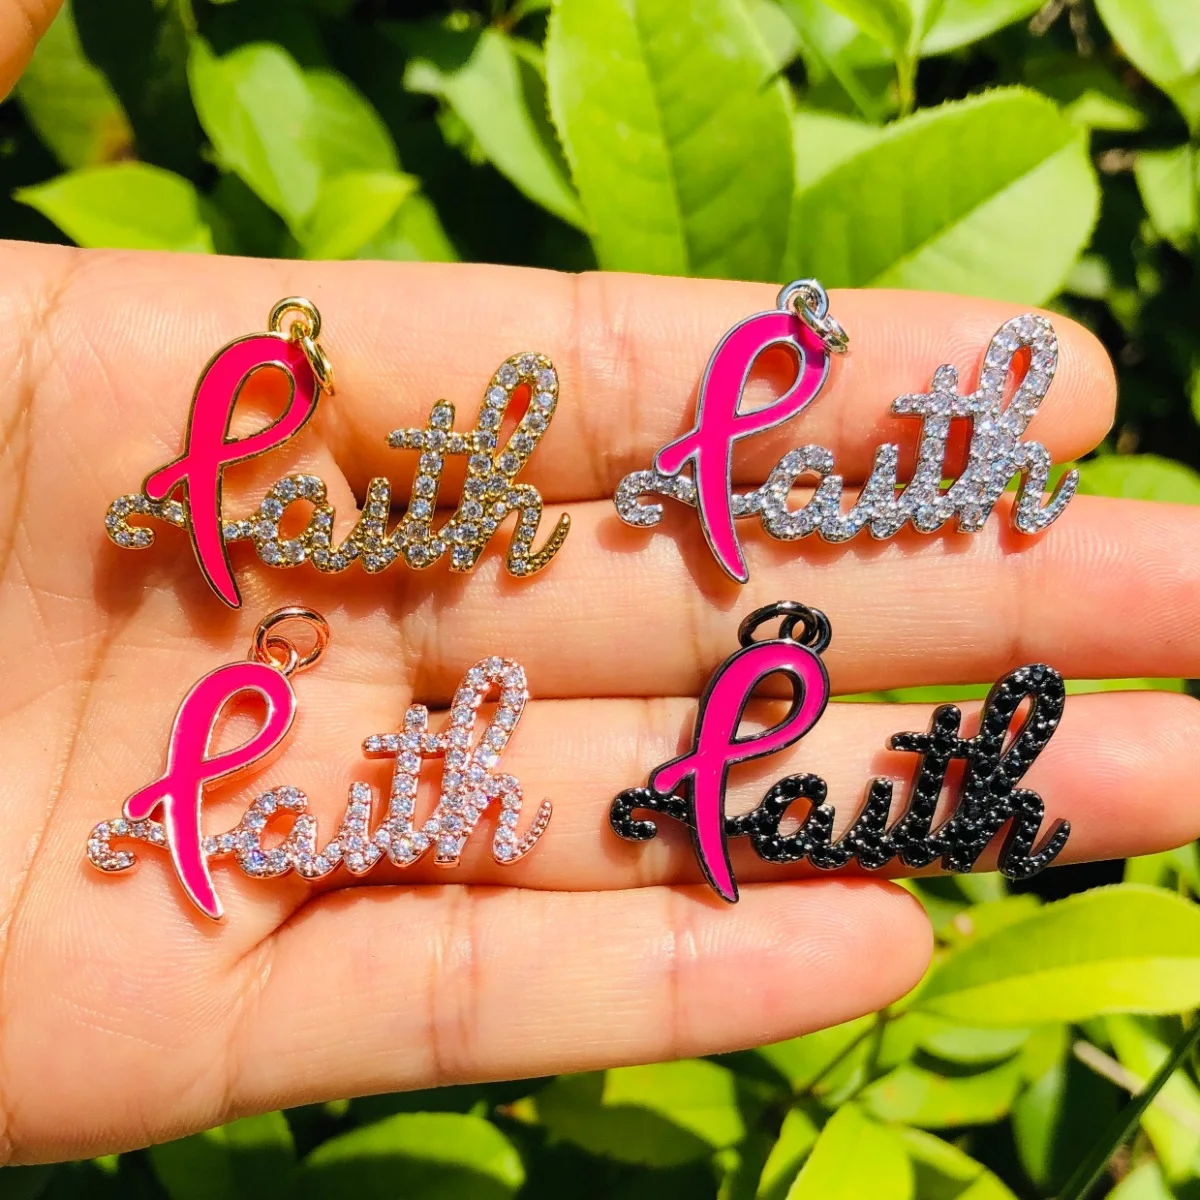 5pcs FAITH Word Charms for Bracelet Making Letter Pendant Necklace Bangle Pink Ribbon Breast Cancer Awareness Keychain Accessory